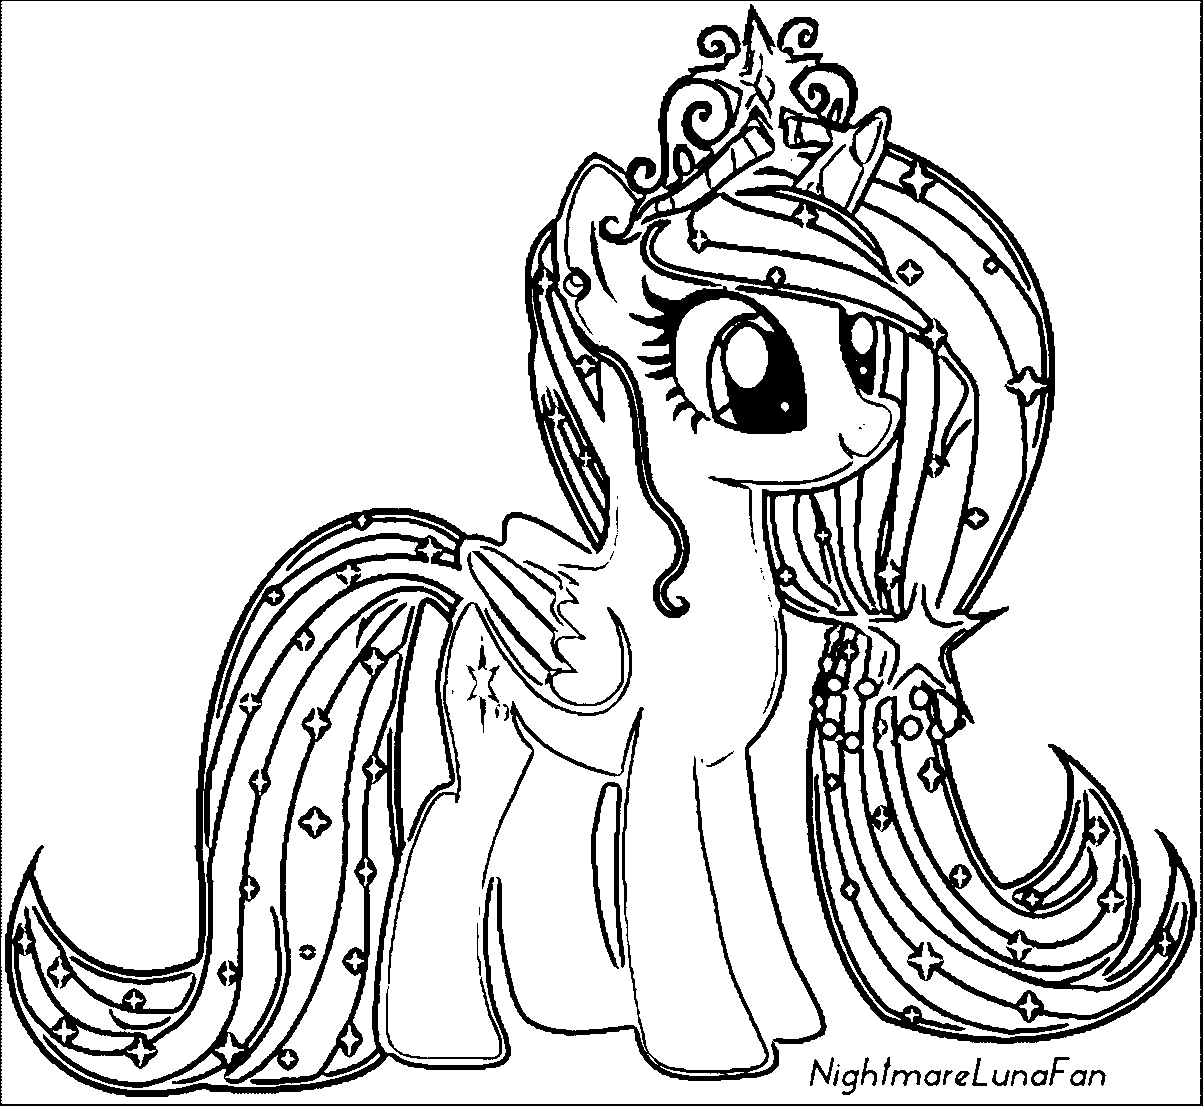 coloring book ~ Twilight Sparkle Princess With Open Wings Myle Pony Coloring  Image Inspirations Book Pages Equestria Girls 60 My Little Pony Coloring  Twilight Sparkle Image Inspirations. My Little Pony Coloring Twilight